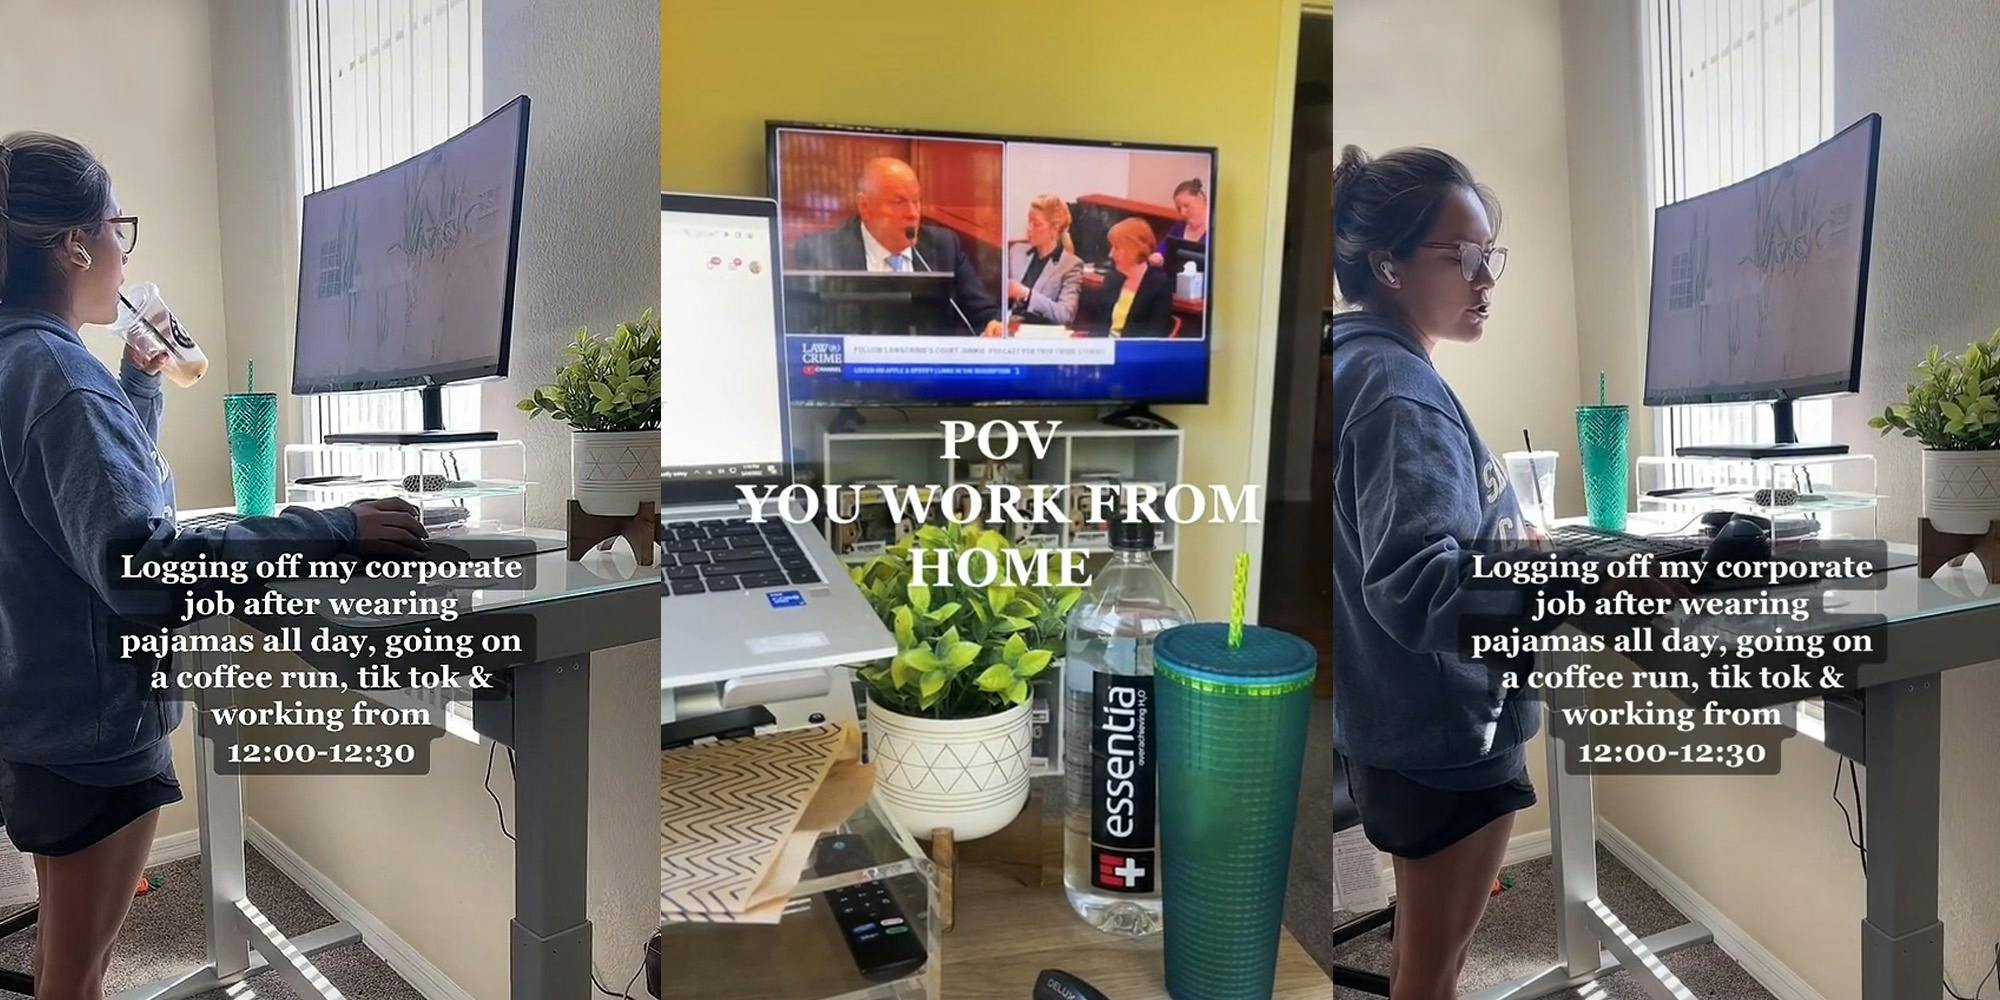 ‘I feel like I’m the only one who’s working from home and working harder than I ever did in an office’: Remote employee jokes about not work...